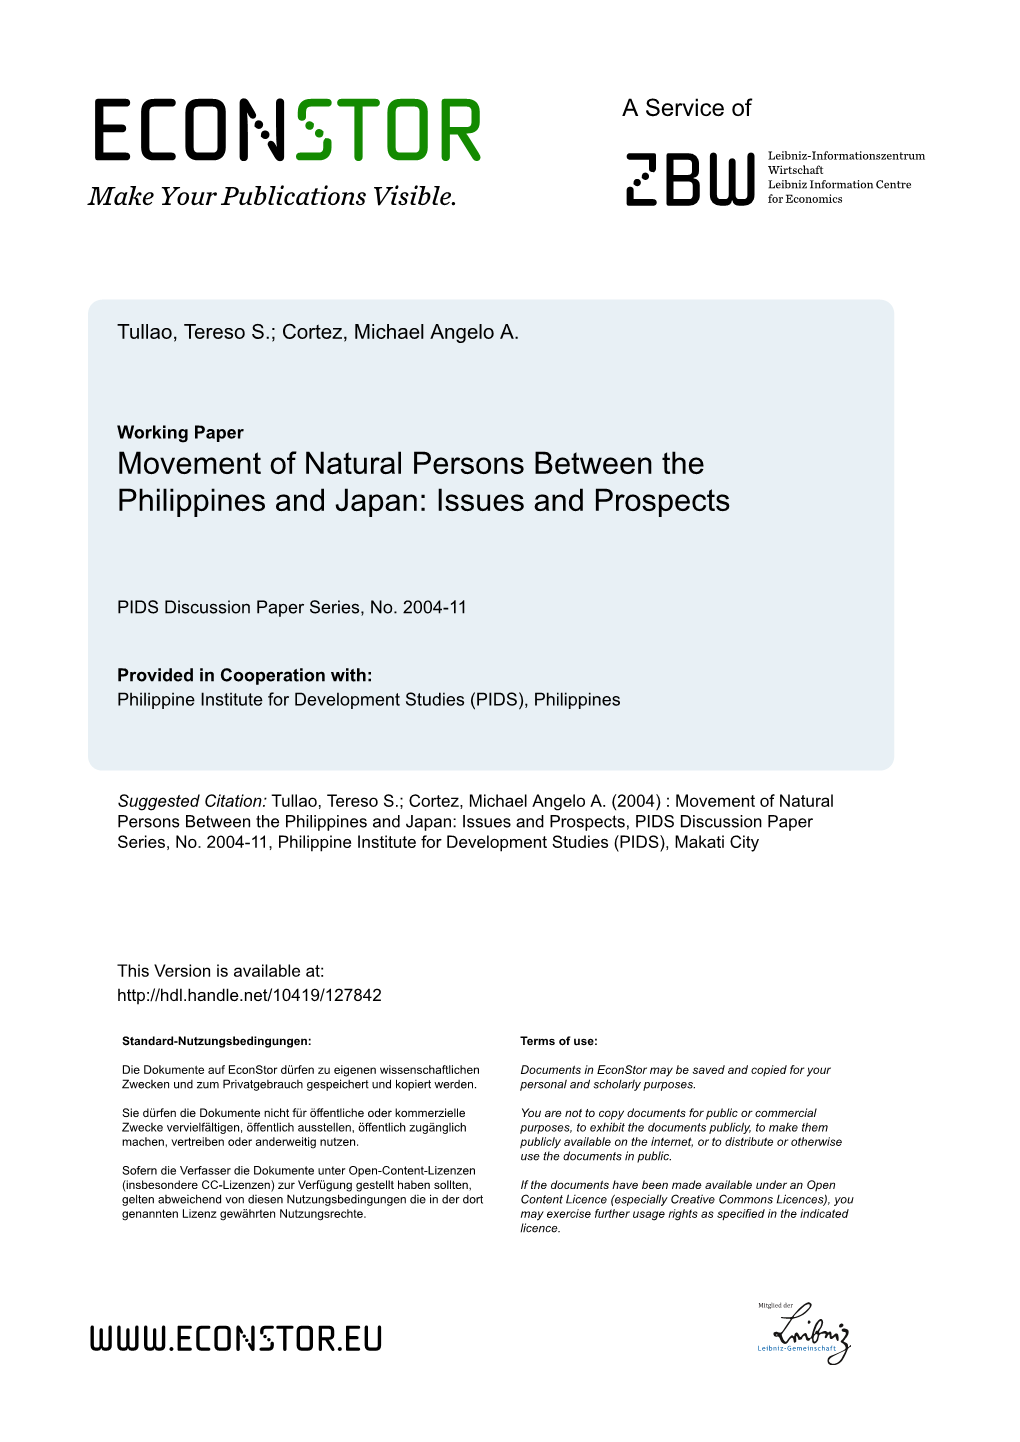 Movement of Natural Persons Between the Philippines and Japan: Issues and Prospects